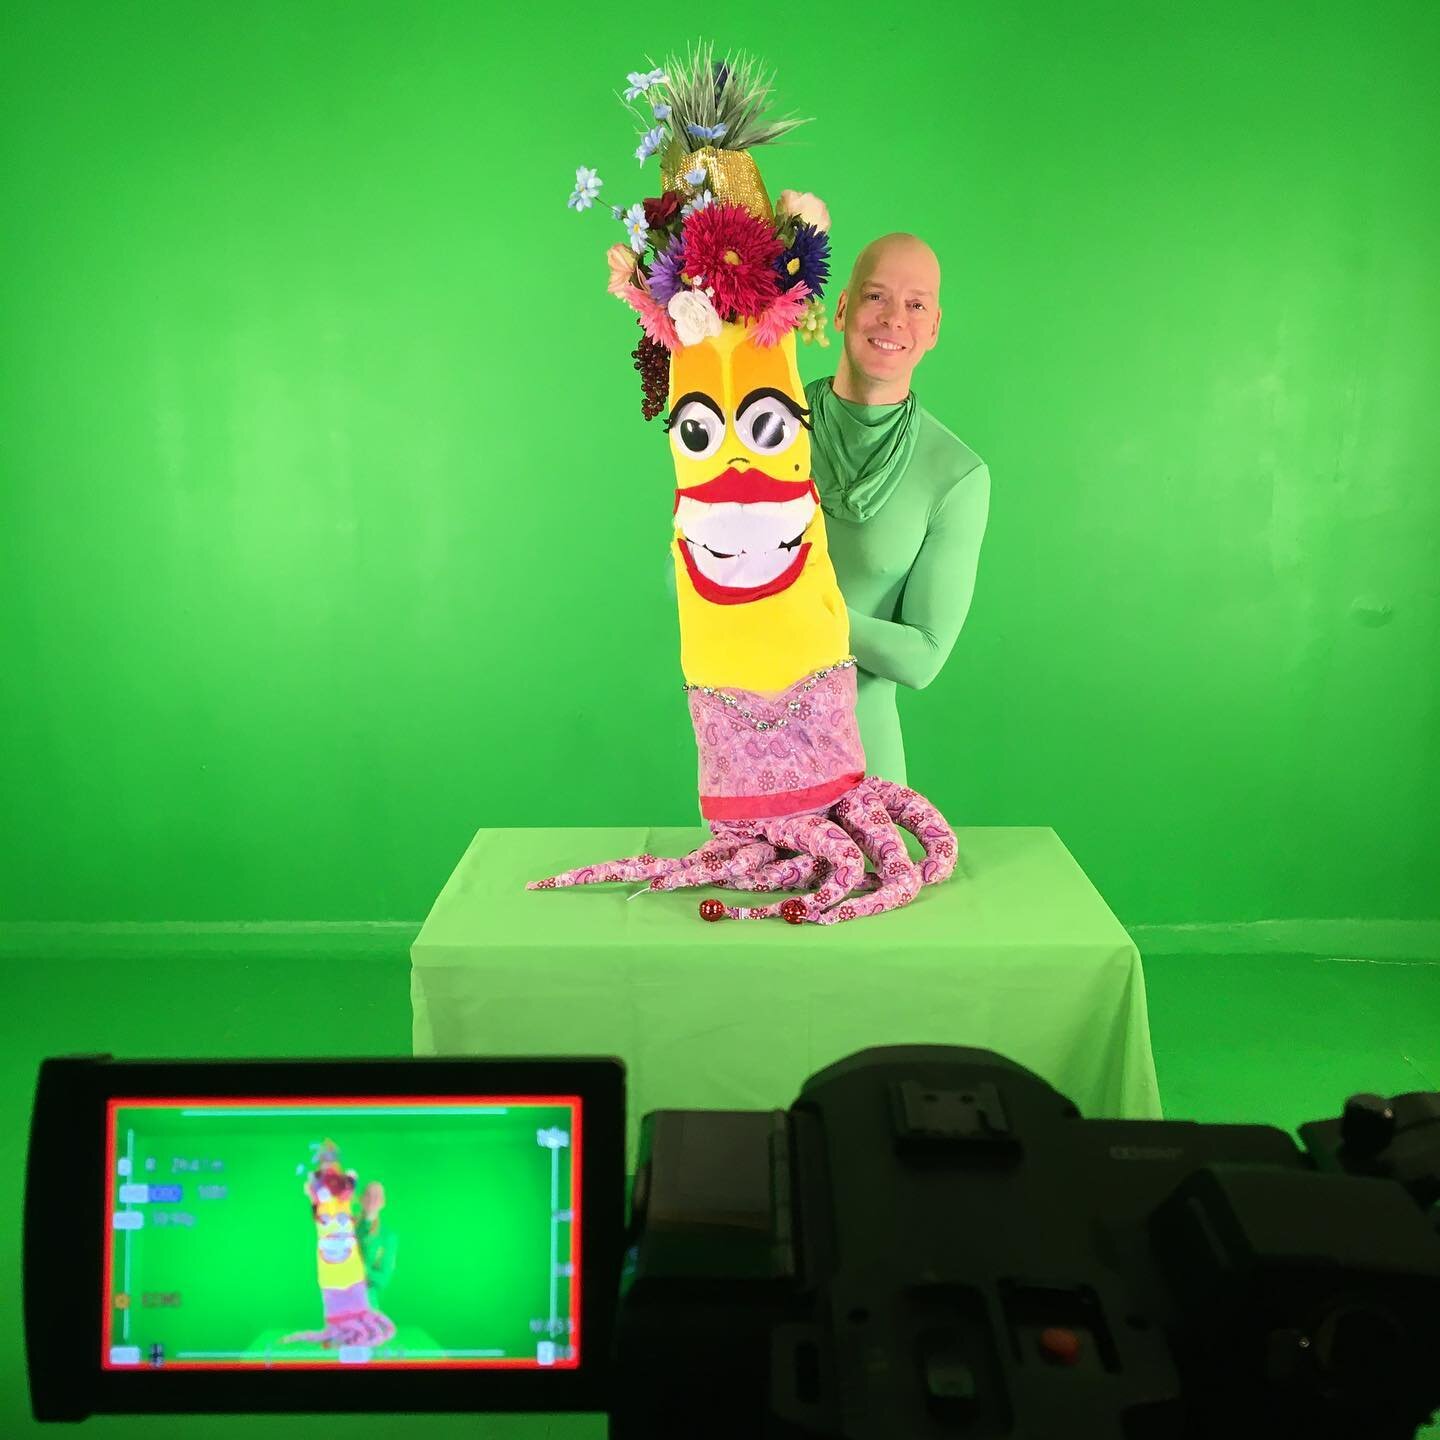 Margarita hits the stage for a brand new song and music video!! Yay!! Check out the Marky Monday YouTube channel for HAPPY HAPPY BANANA!!! #banana #greenscreen #happybanana